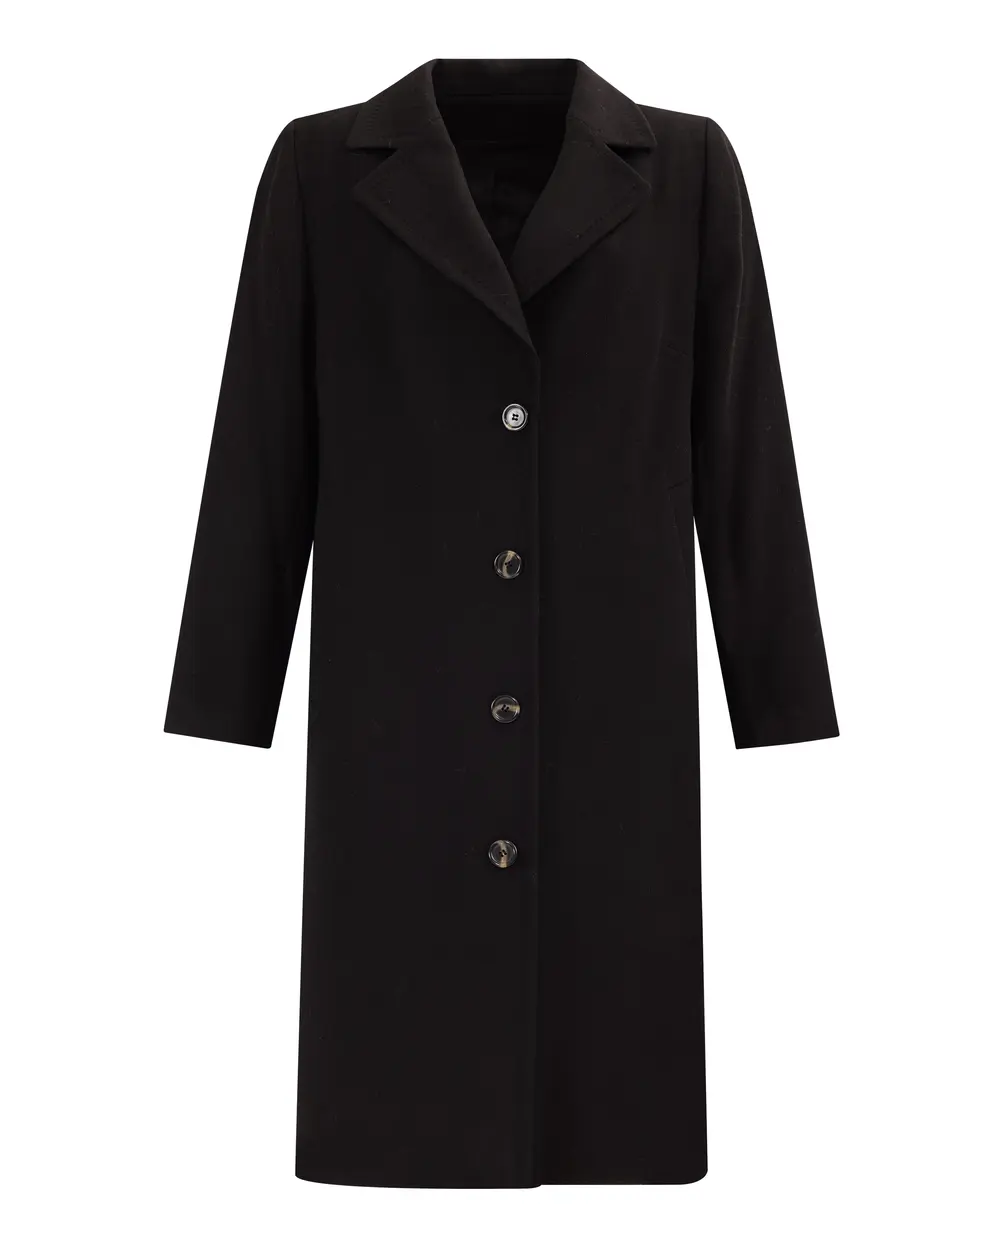 Plus Size Pocket Buttoned Lined Coat